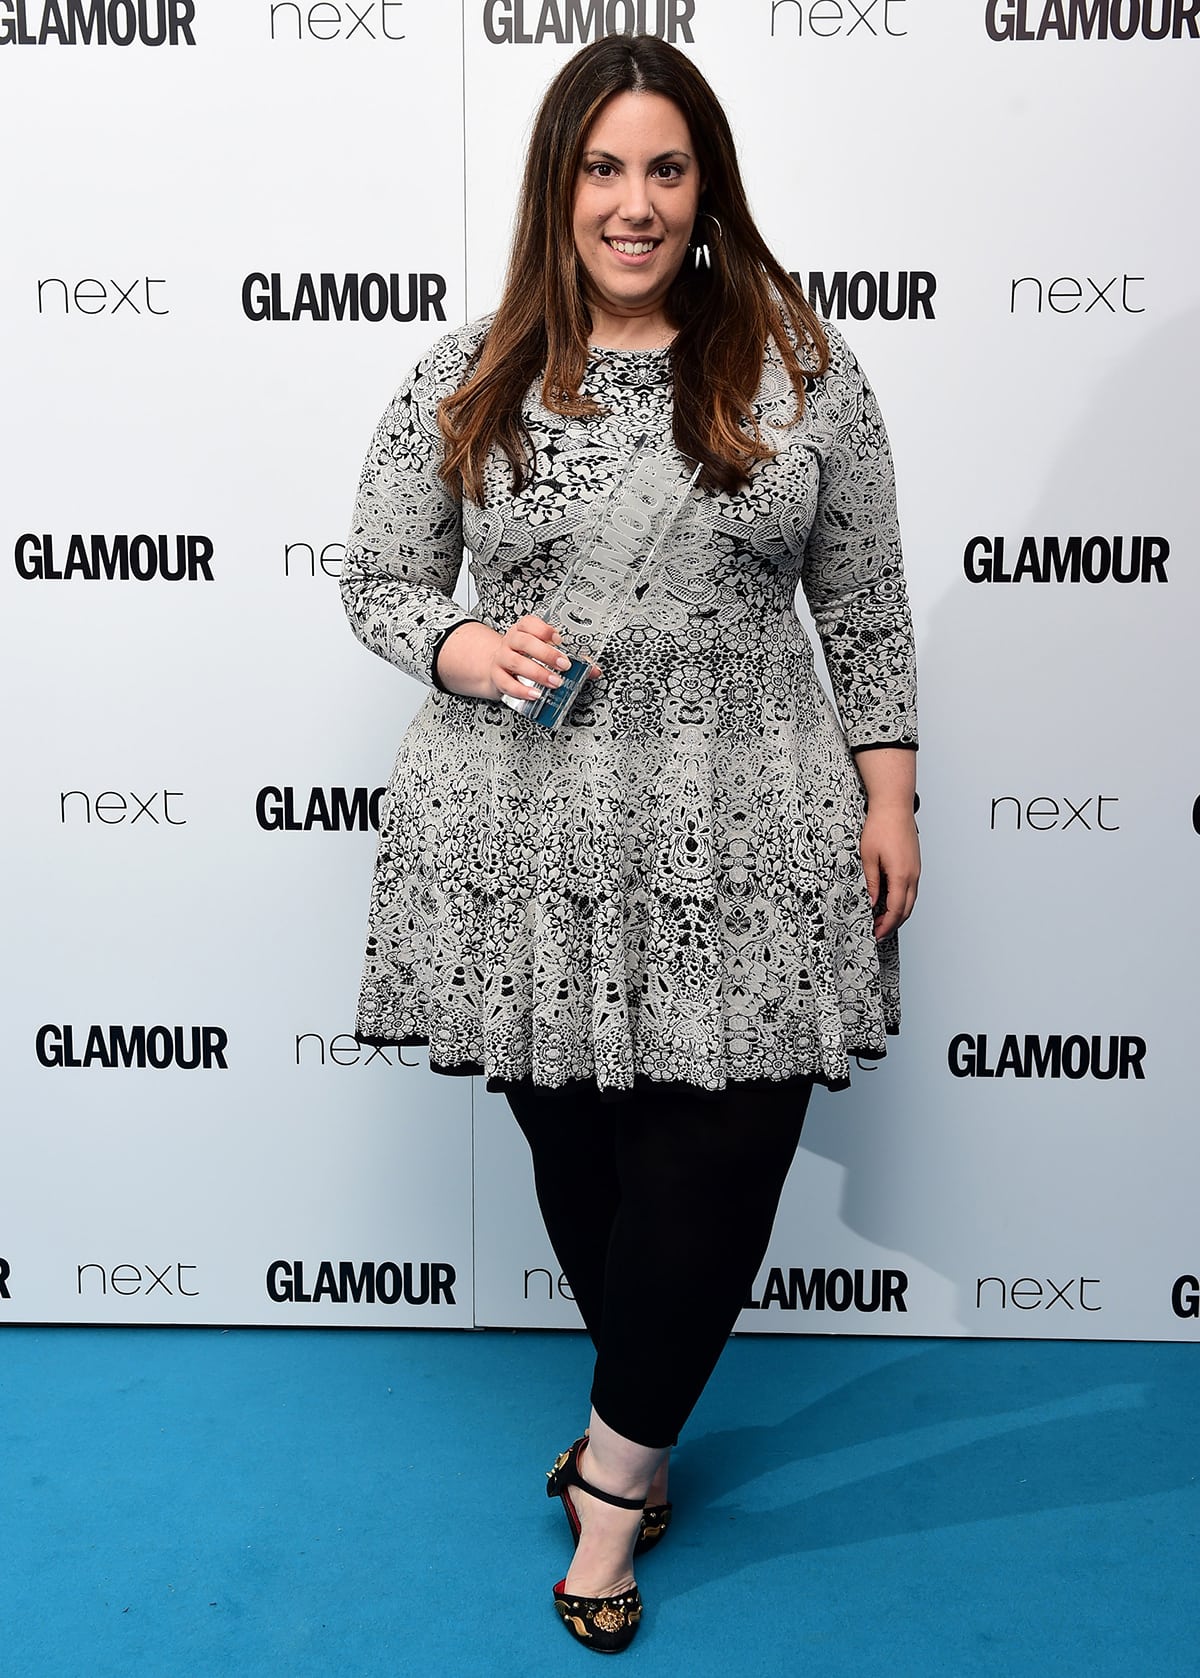 Mary Katrantzou has earned several accolades, including Glamour Designer of the Year in 2015